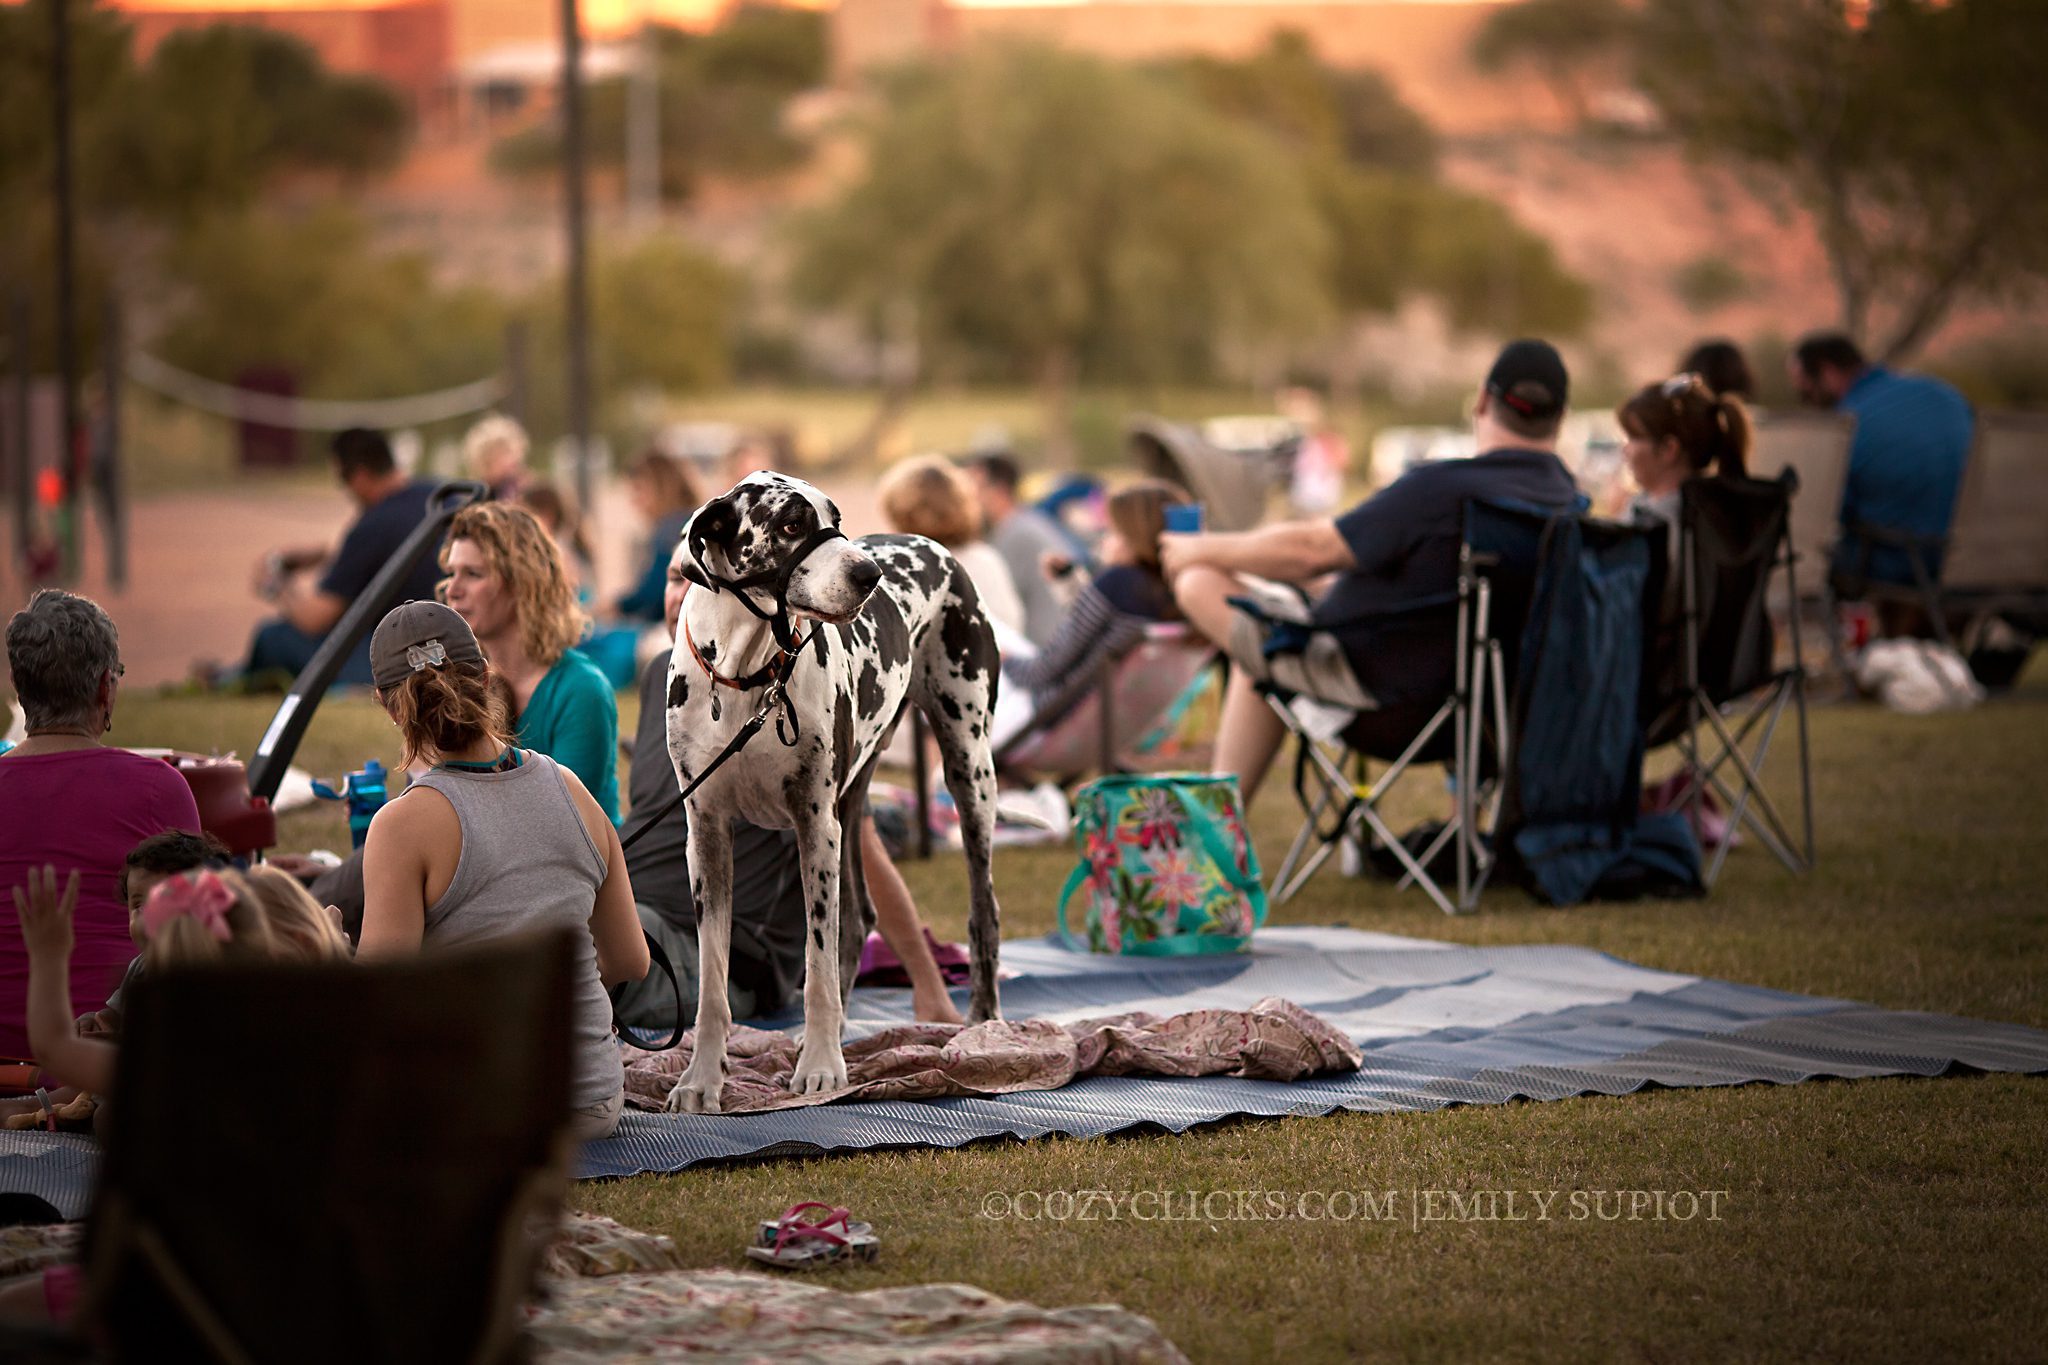 PhoenixFamily and Child photographer Concert photography at Desert Foothills Park  